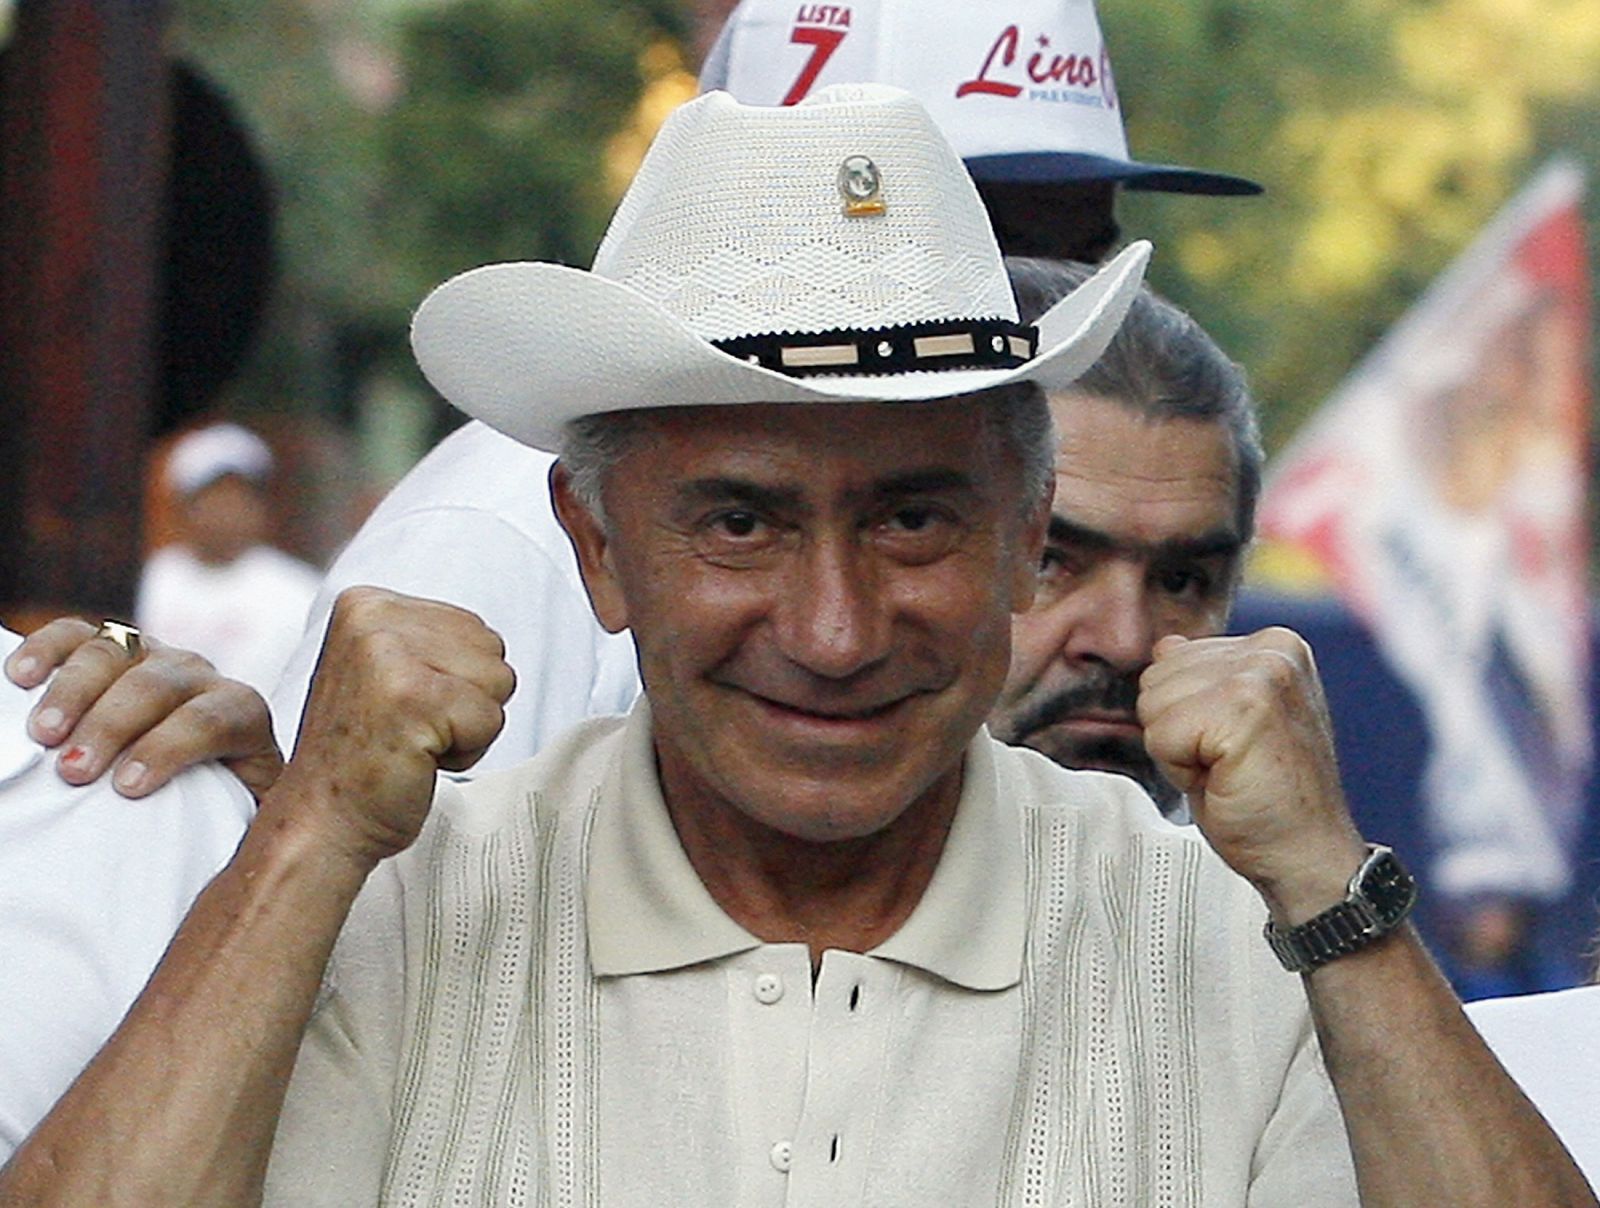 File photo of former Paraguayan Army commander Lino Oviedo campaigning in Asuncion